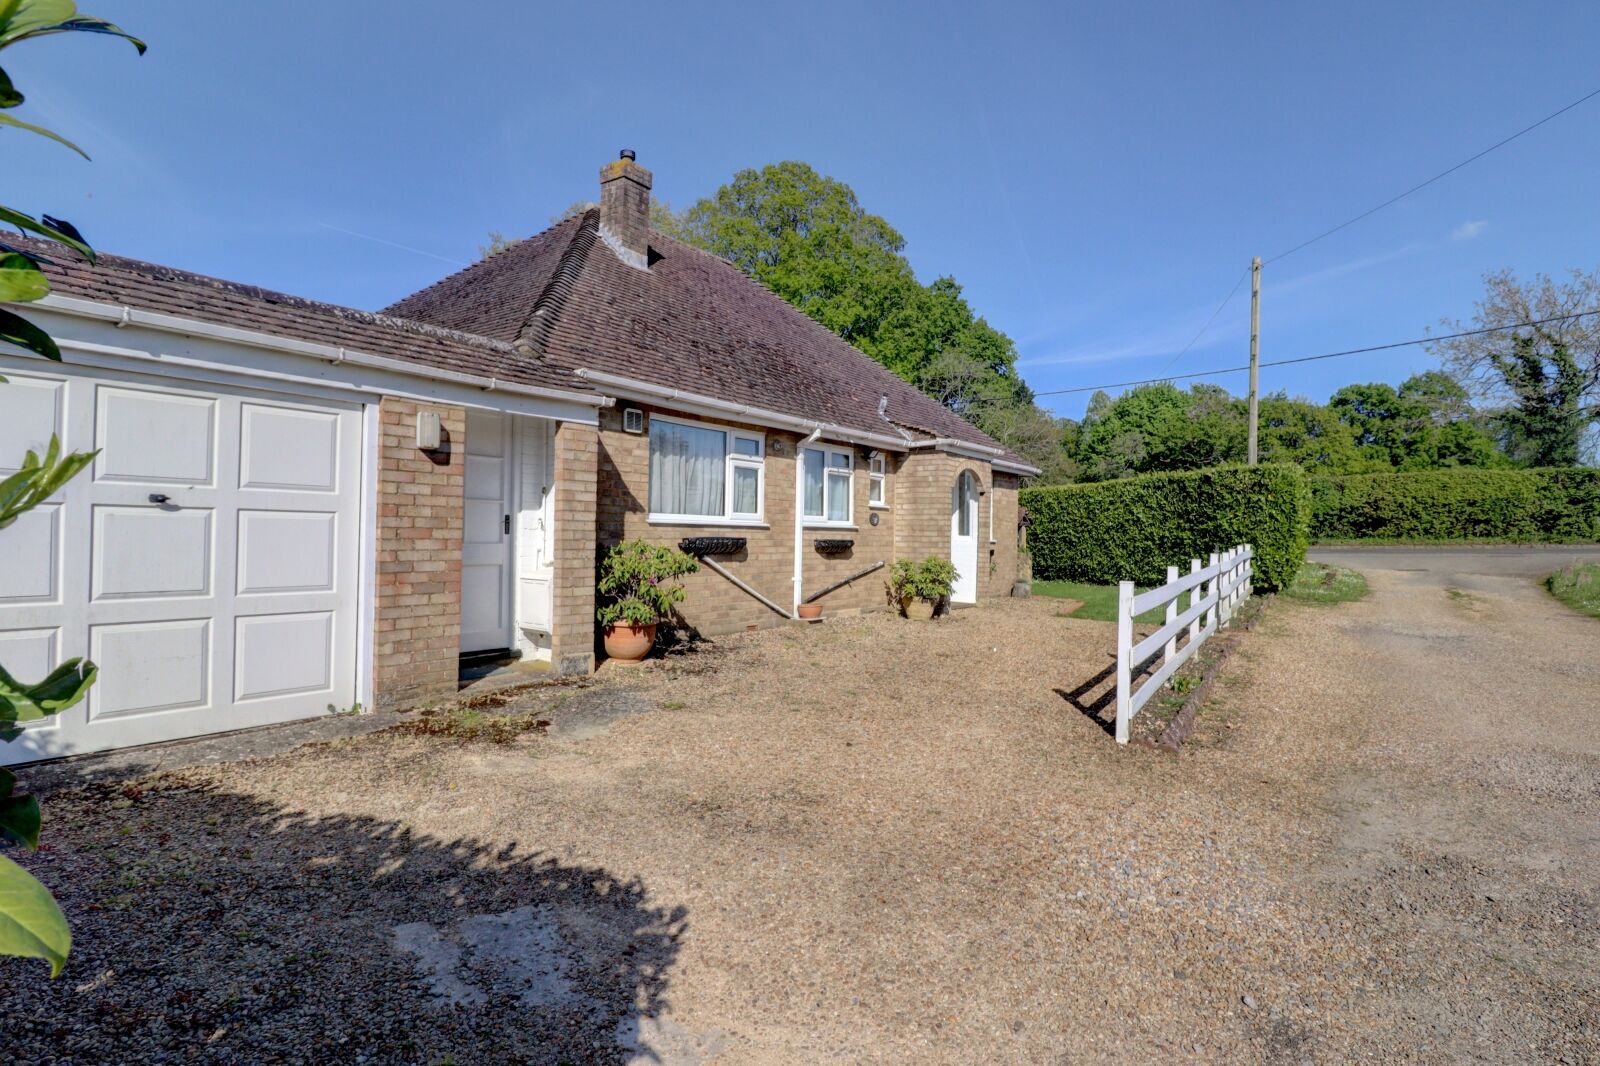 2 bedroom detached bungalow for sale School Close, Cryers Hill, HP15, main image